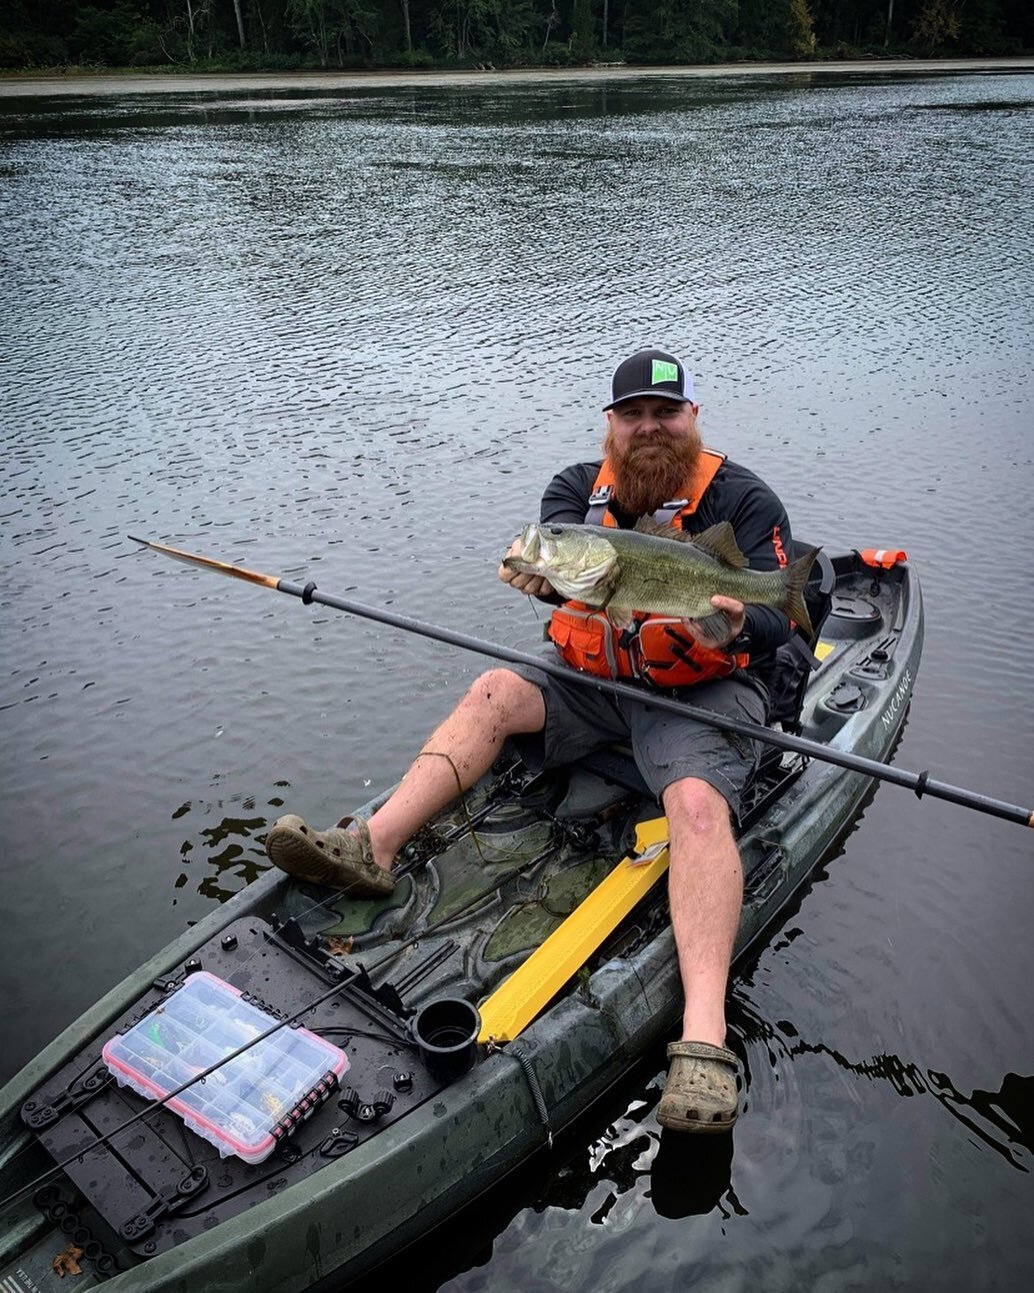 Jim Bob with a tank this past weekend! @down_south_kayak_fishing